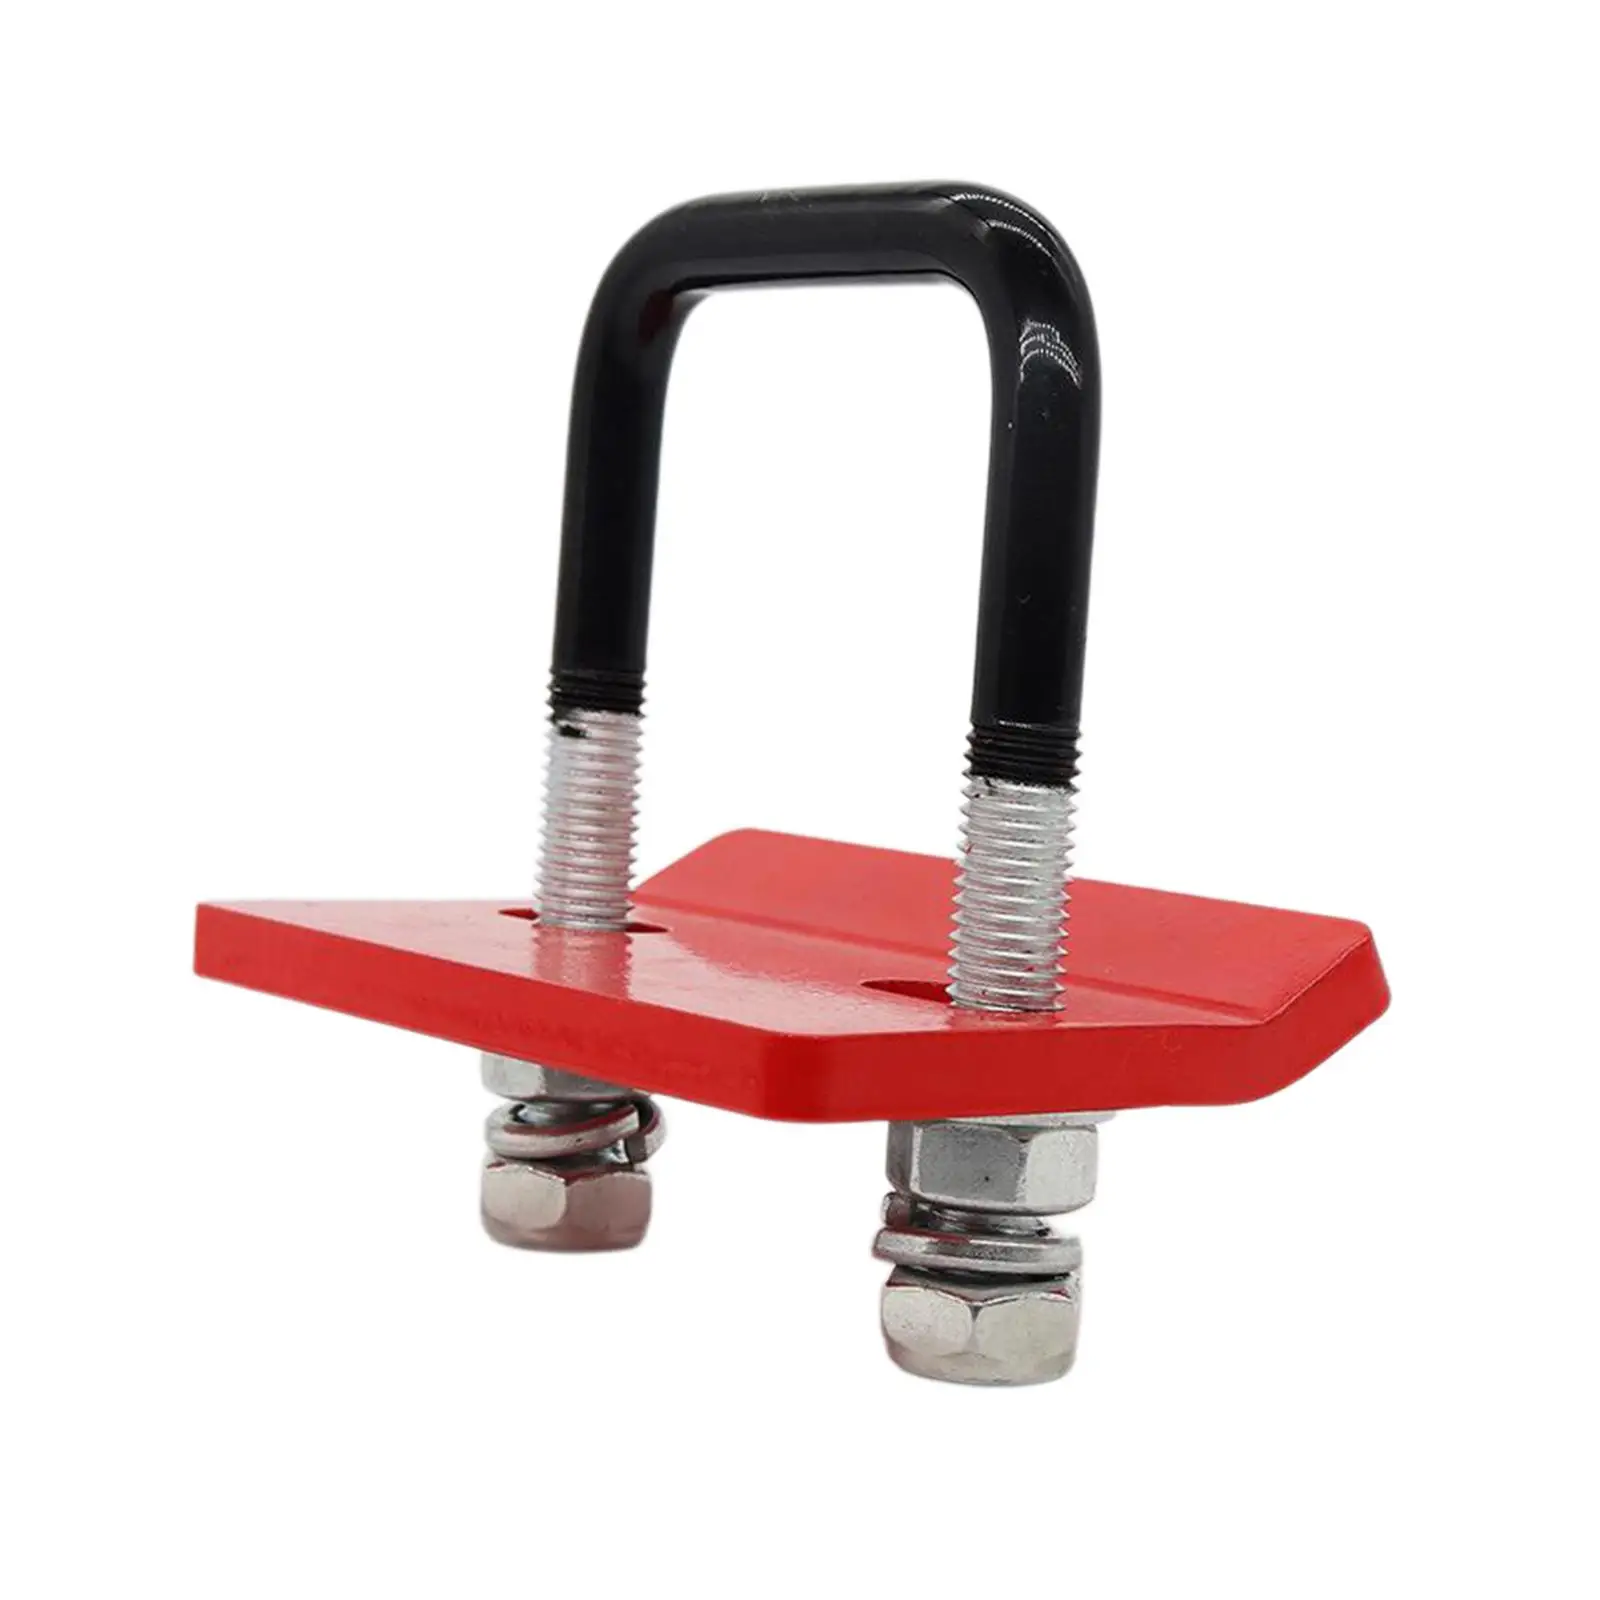 Alloy Steel Hitch Tightener Accessories Heavy Duty Trailer Hitches Clamp Anti Rattle Stabilizer for Bike Rack Trailer Ball Mount